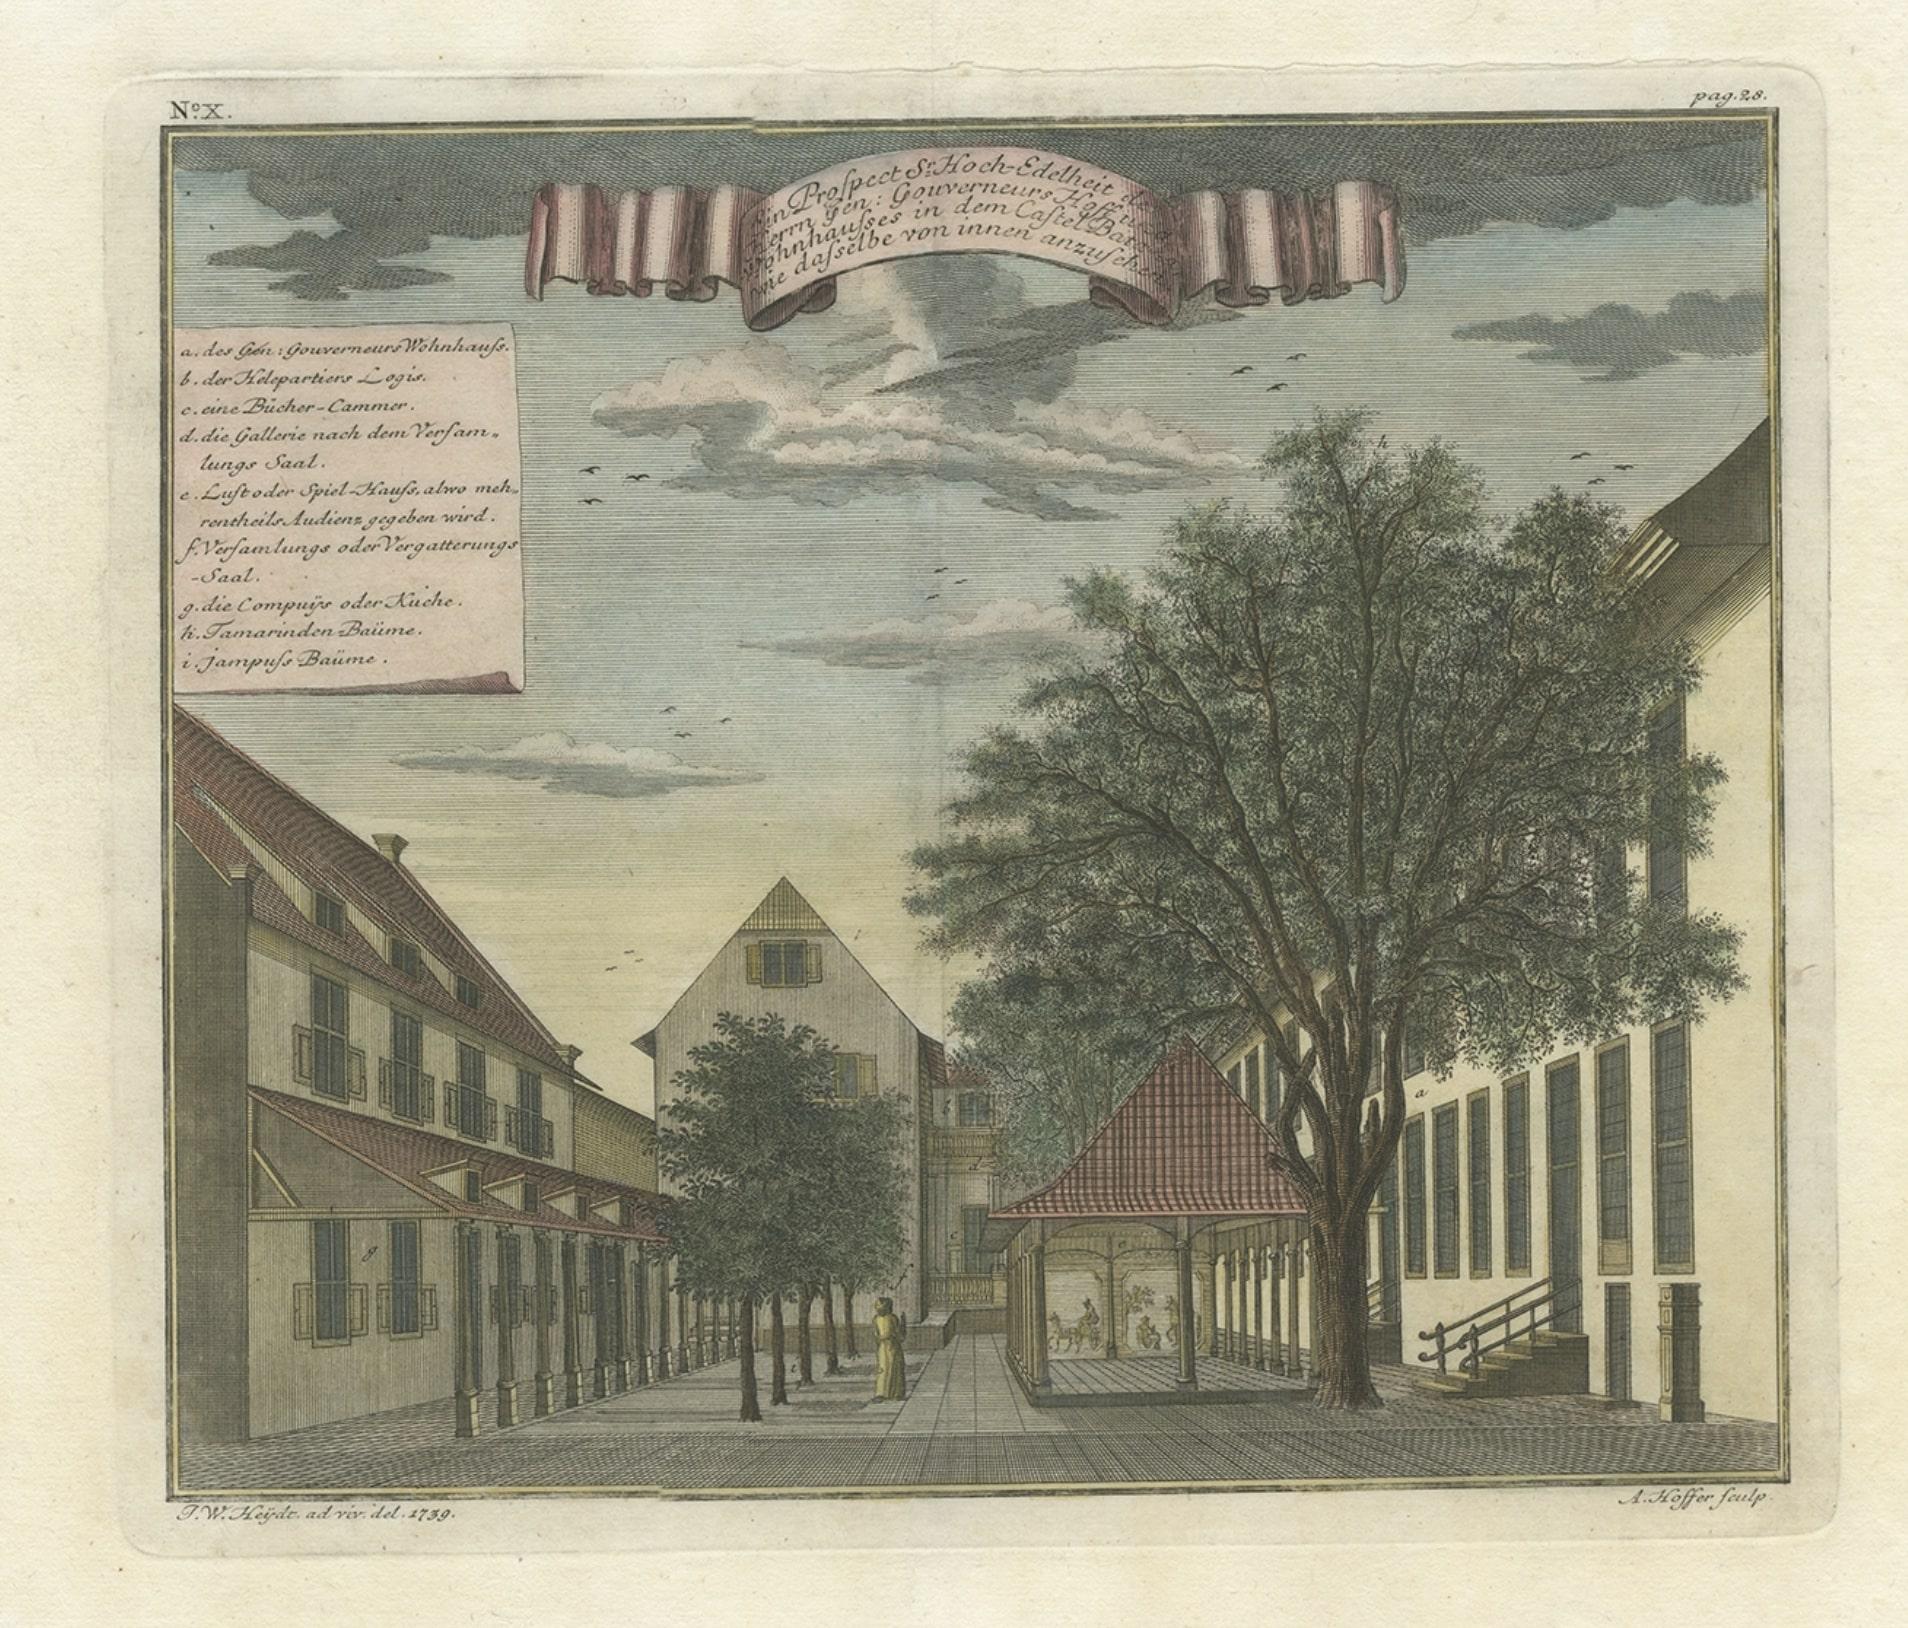 Paper Rare Print of the Governor-General's Residence in Batavia 'Jakarta', Indonesia For Sale